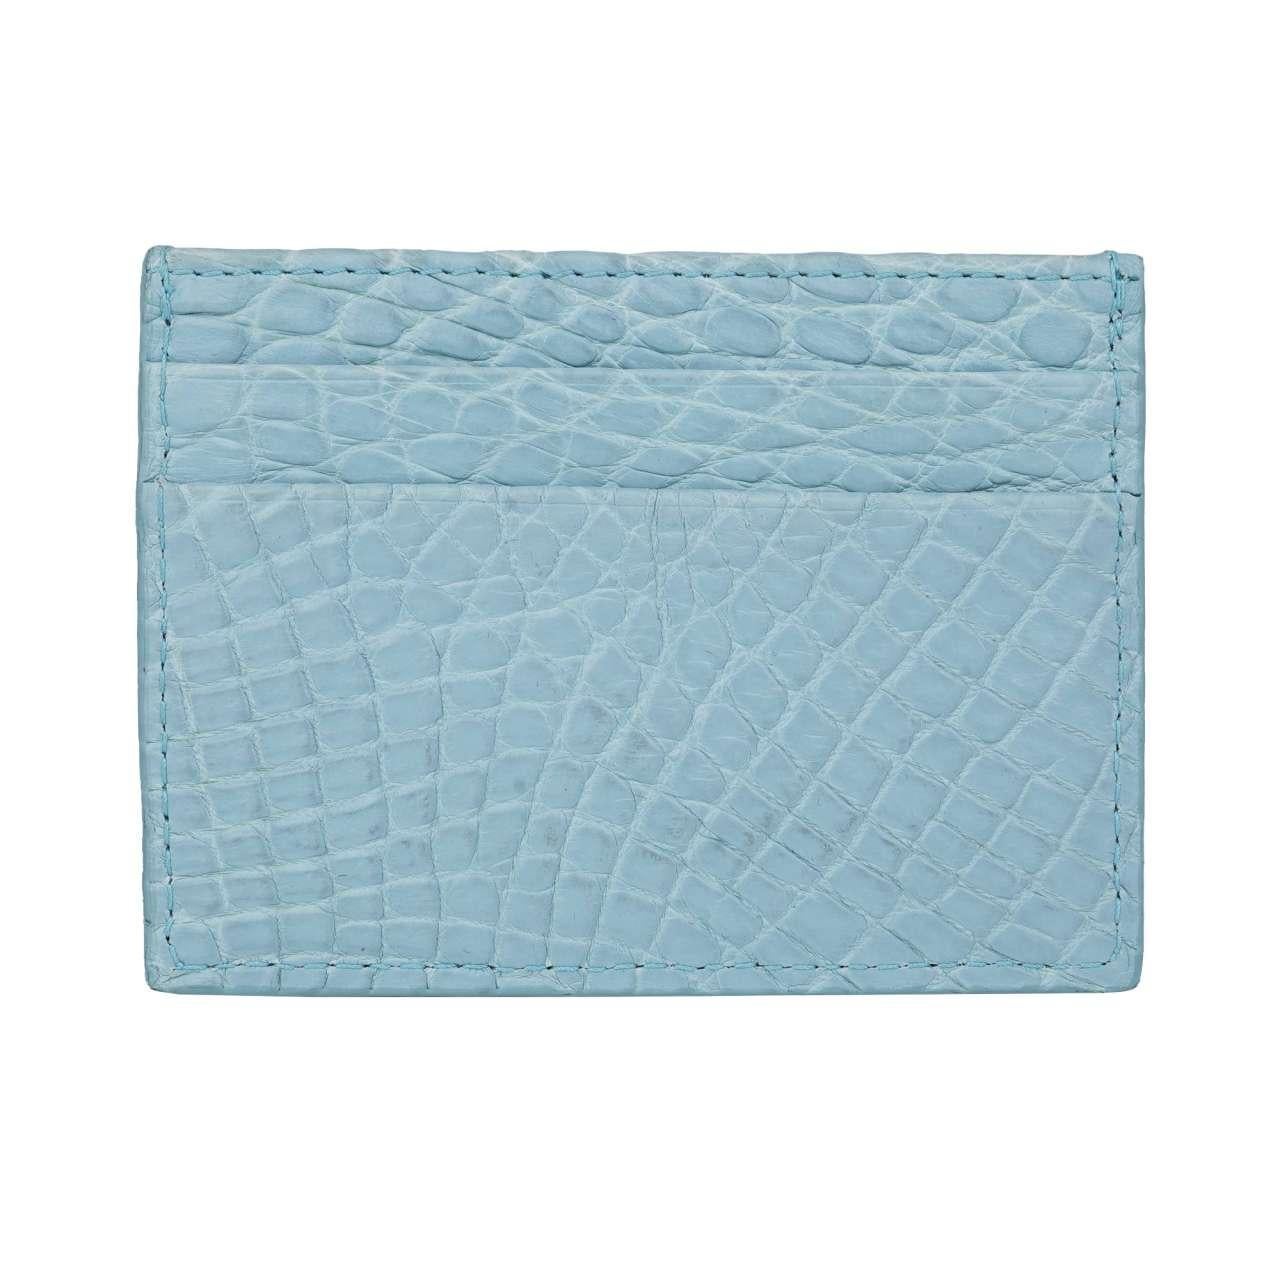 - Crocodile leather cards etui wallet with DG logo plate in light blue by DOLCE & GABBANA - New without Tag - Former RRP: EUR 595 - MADE IN ITALY - Model: BI0330-B2DF3 - Material: 100% Crocodile leather (Coccodrillo) - DG logo black plate in front -